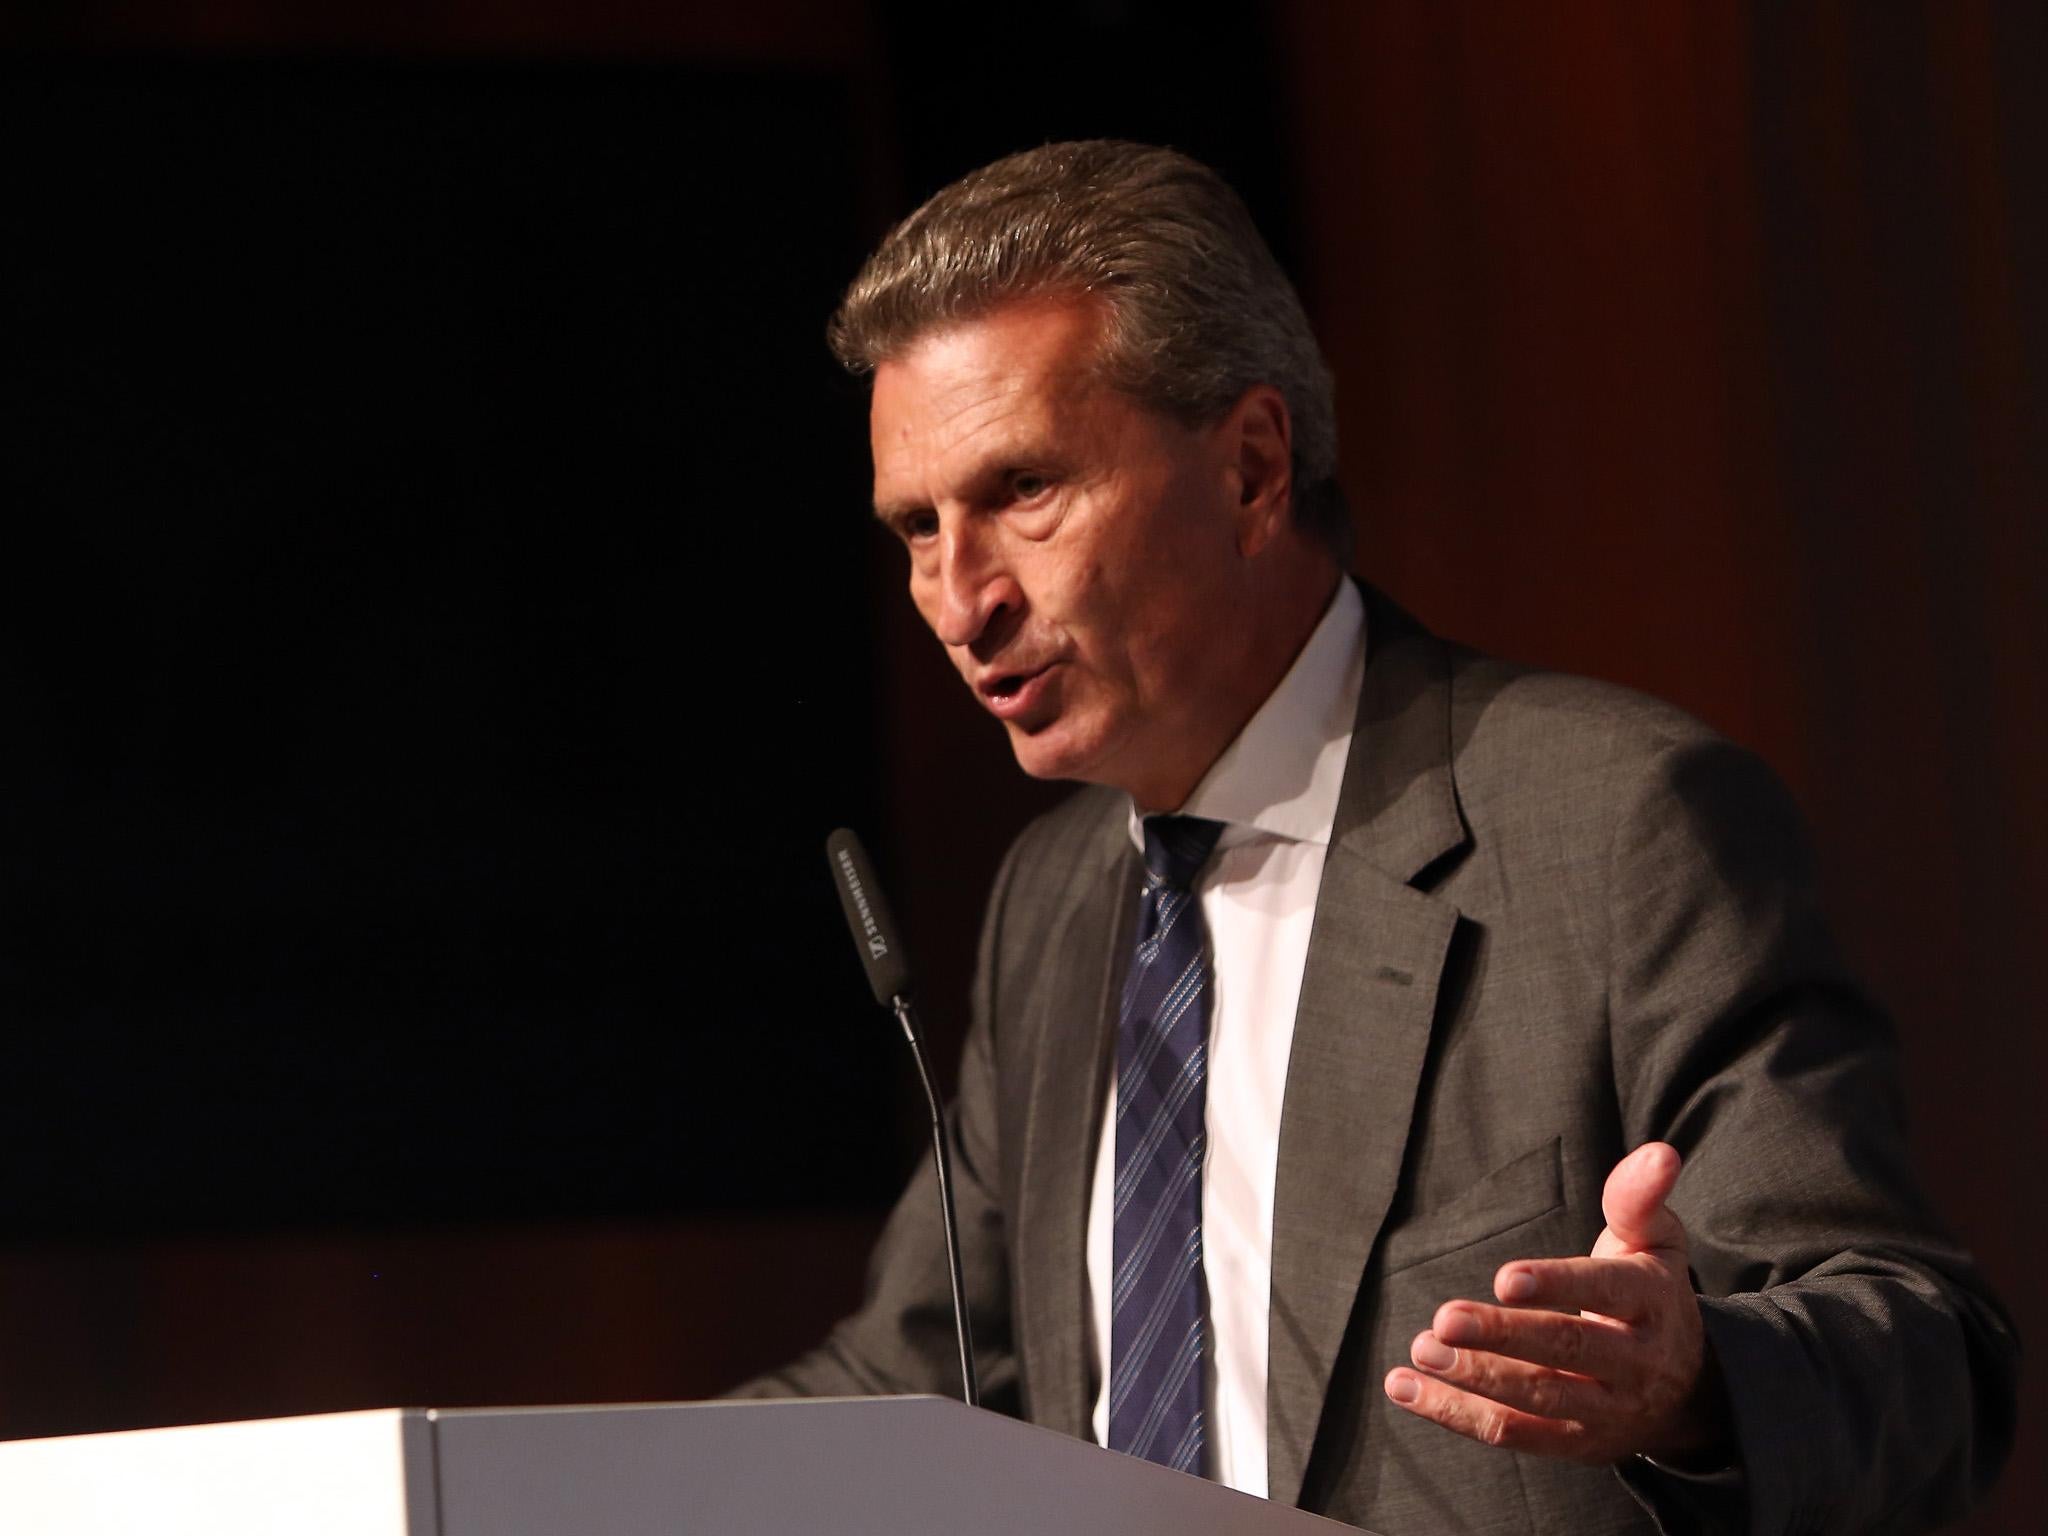 Guenther Oettinger was recently called upon by Jean-Claude Juncker to organise the EU's budget commission